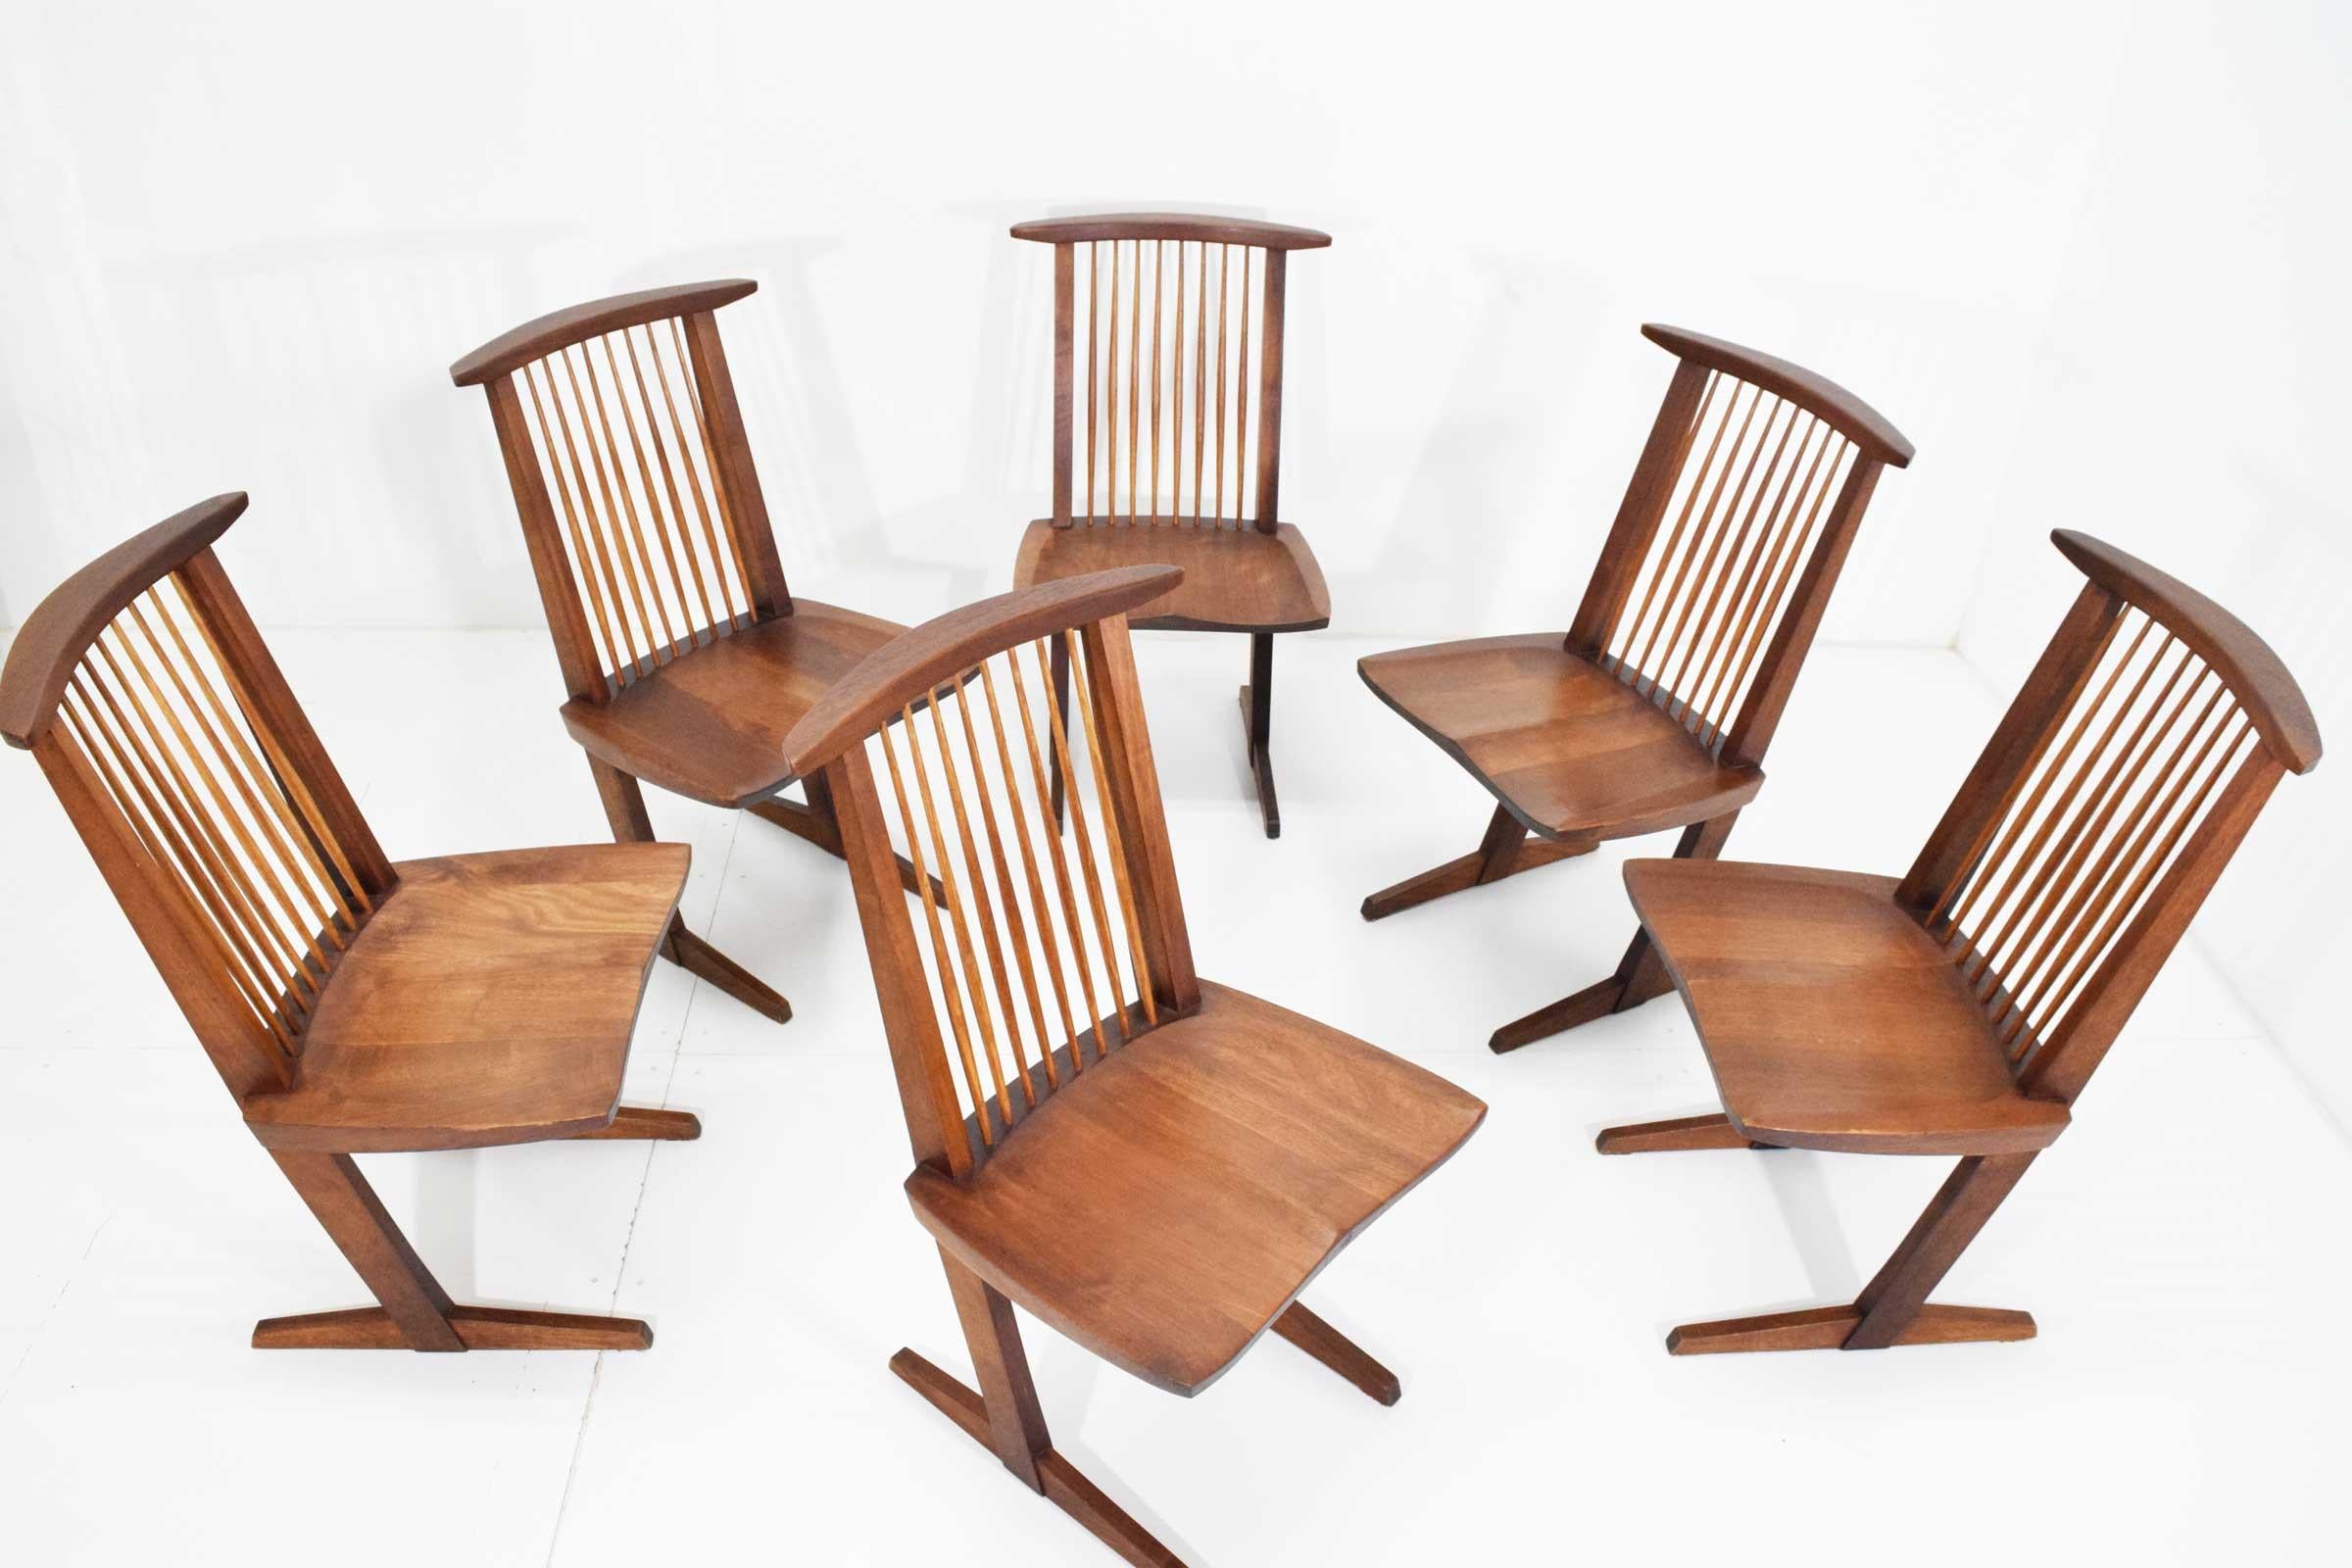 George Nakashima Conoid dining chairs in black walnut and hickory. New Hope, Pennsylvania, 1970s. Four signed with client's name 